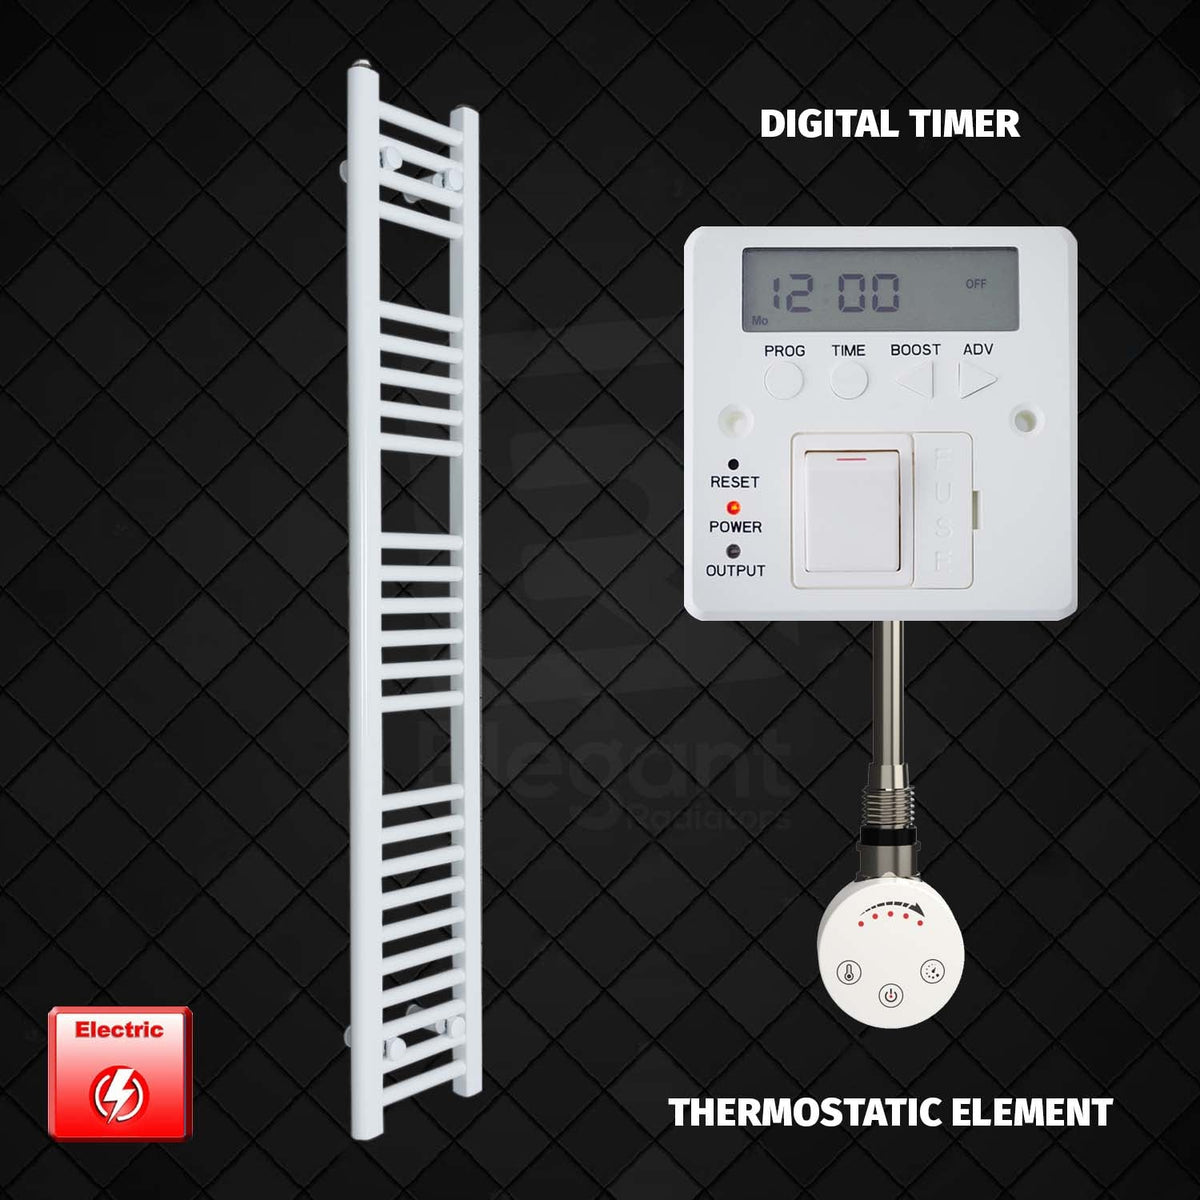 1400 mm High 200 mm Wide Pre-Filled Electric Heated Towel Rail Radiator White Smart Thermostatic Element Digital Timer